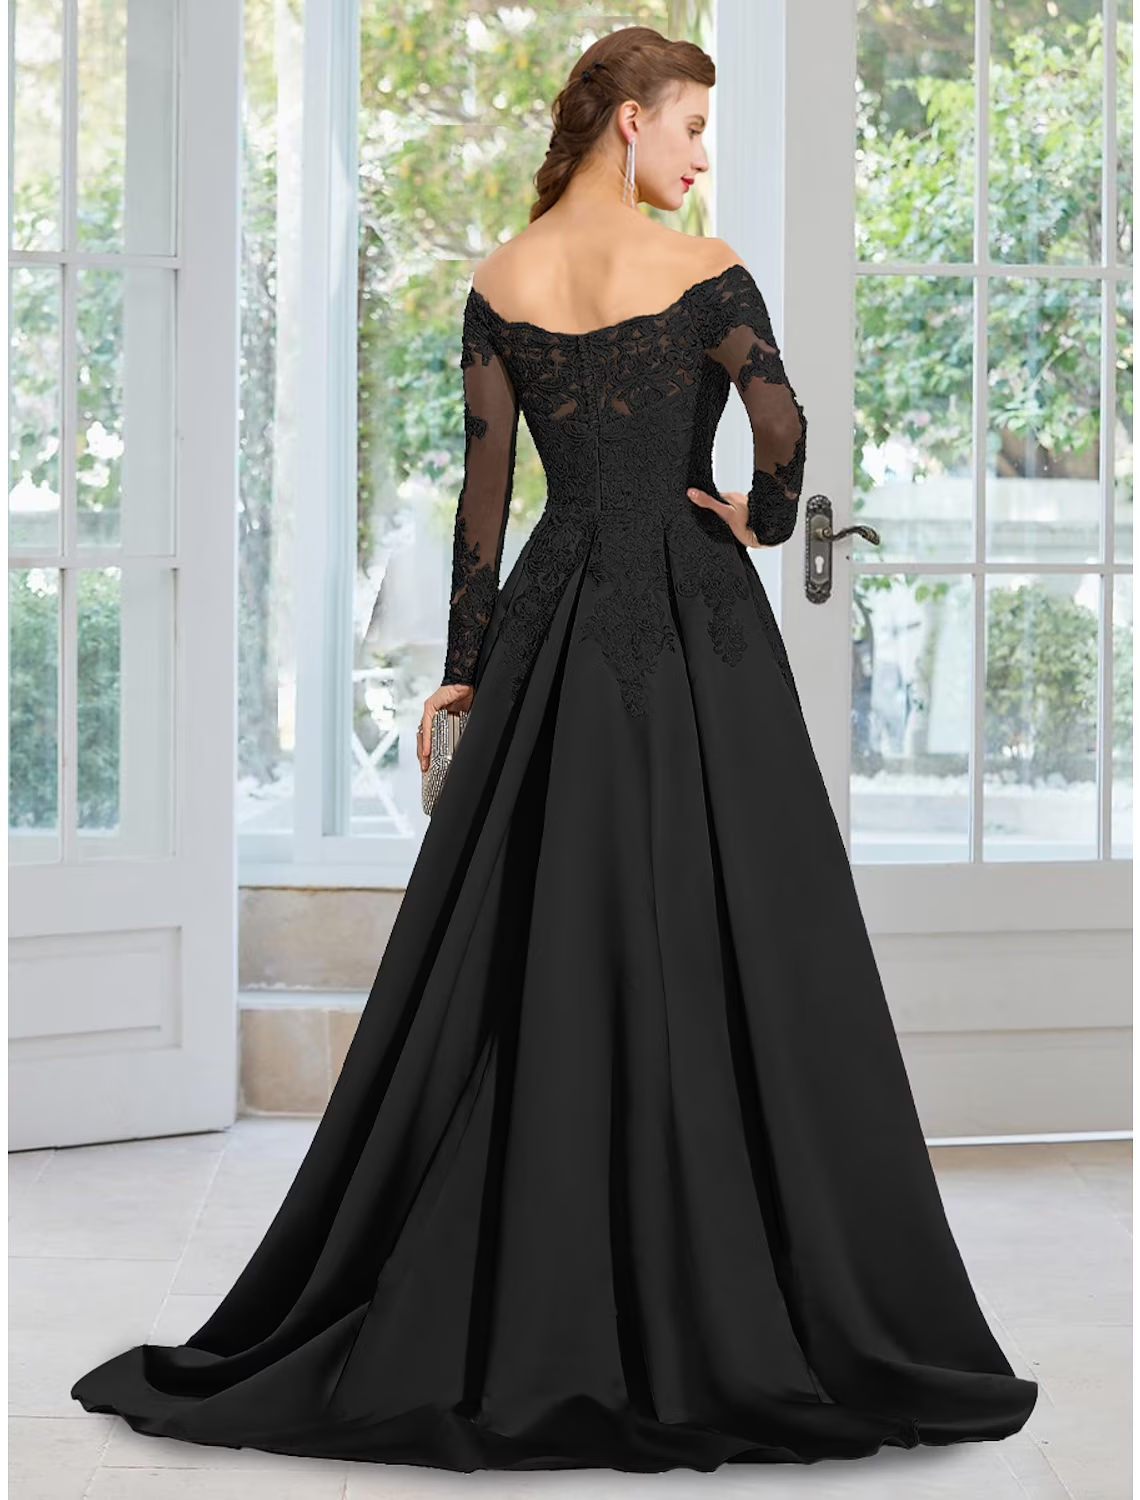 A-Line Evening Gown Black Dress Formal Court Train Long Sleeve Off Shoulder Lace with Appliques